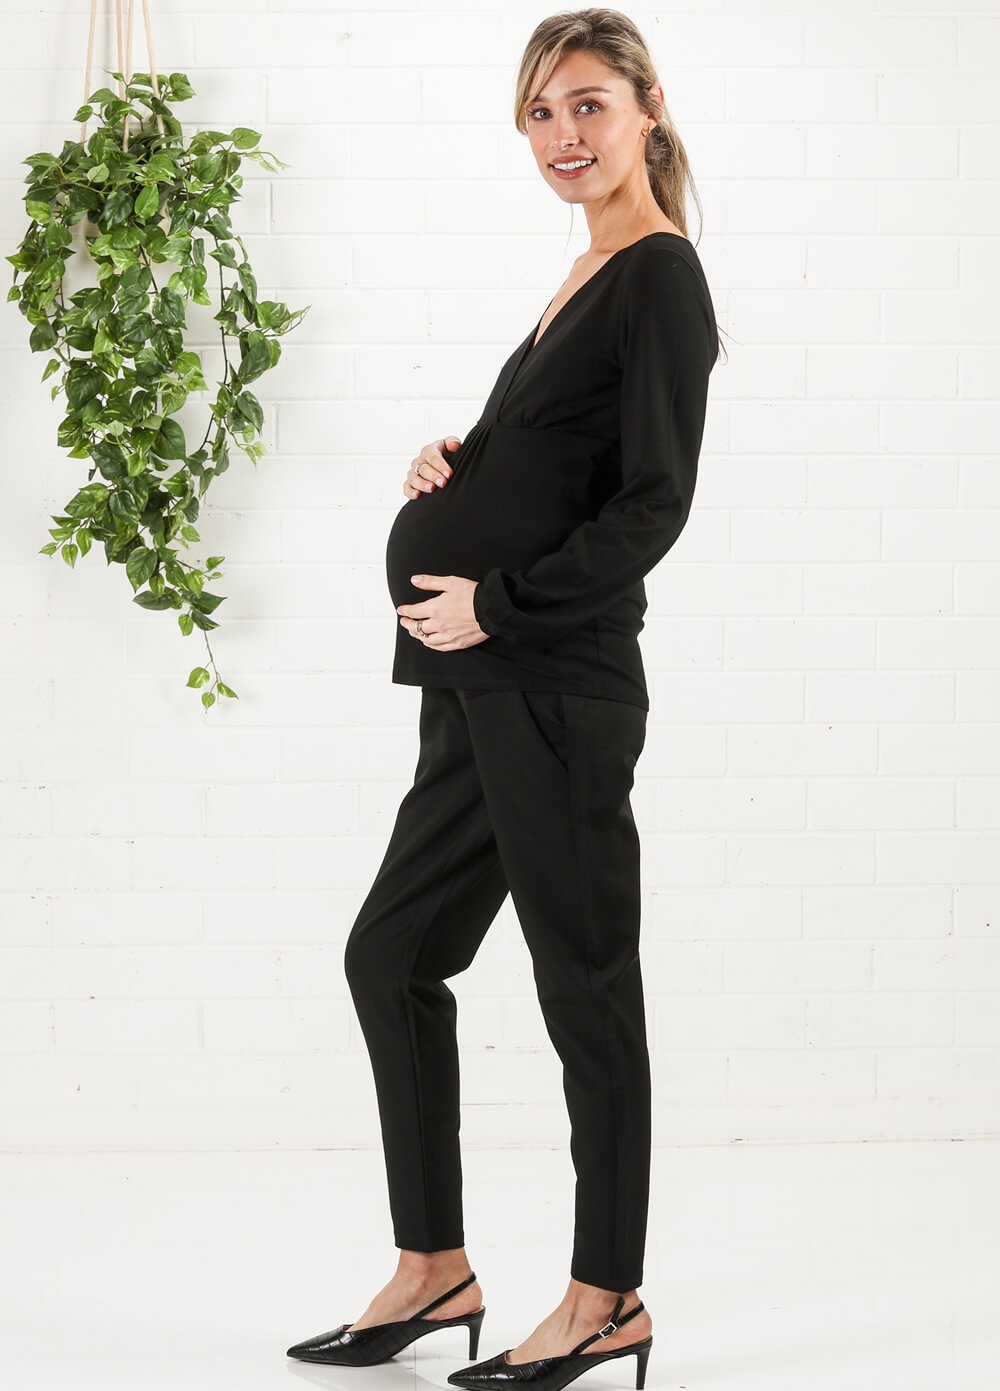 Puff Sleeve Maternity & Nursing Blouse in Black by Queen mum